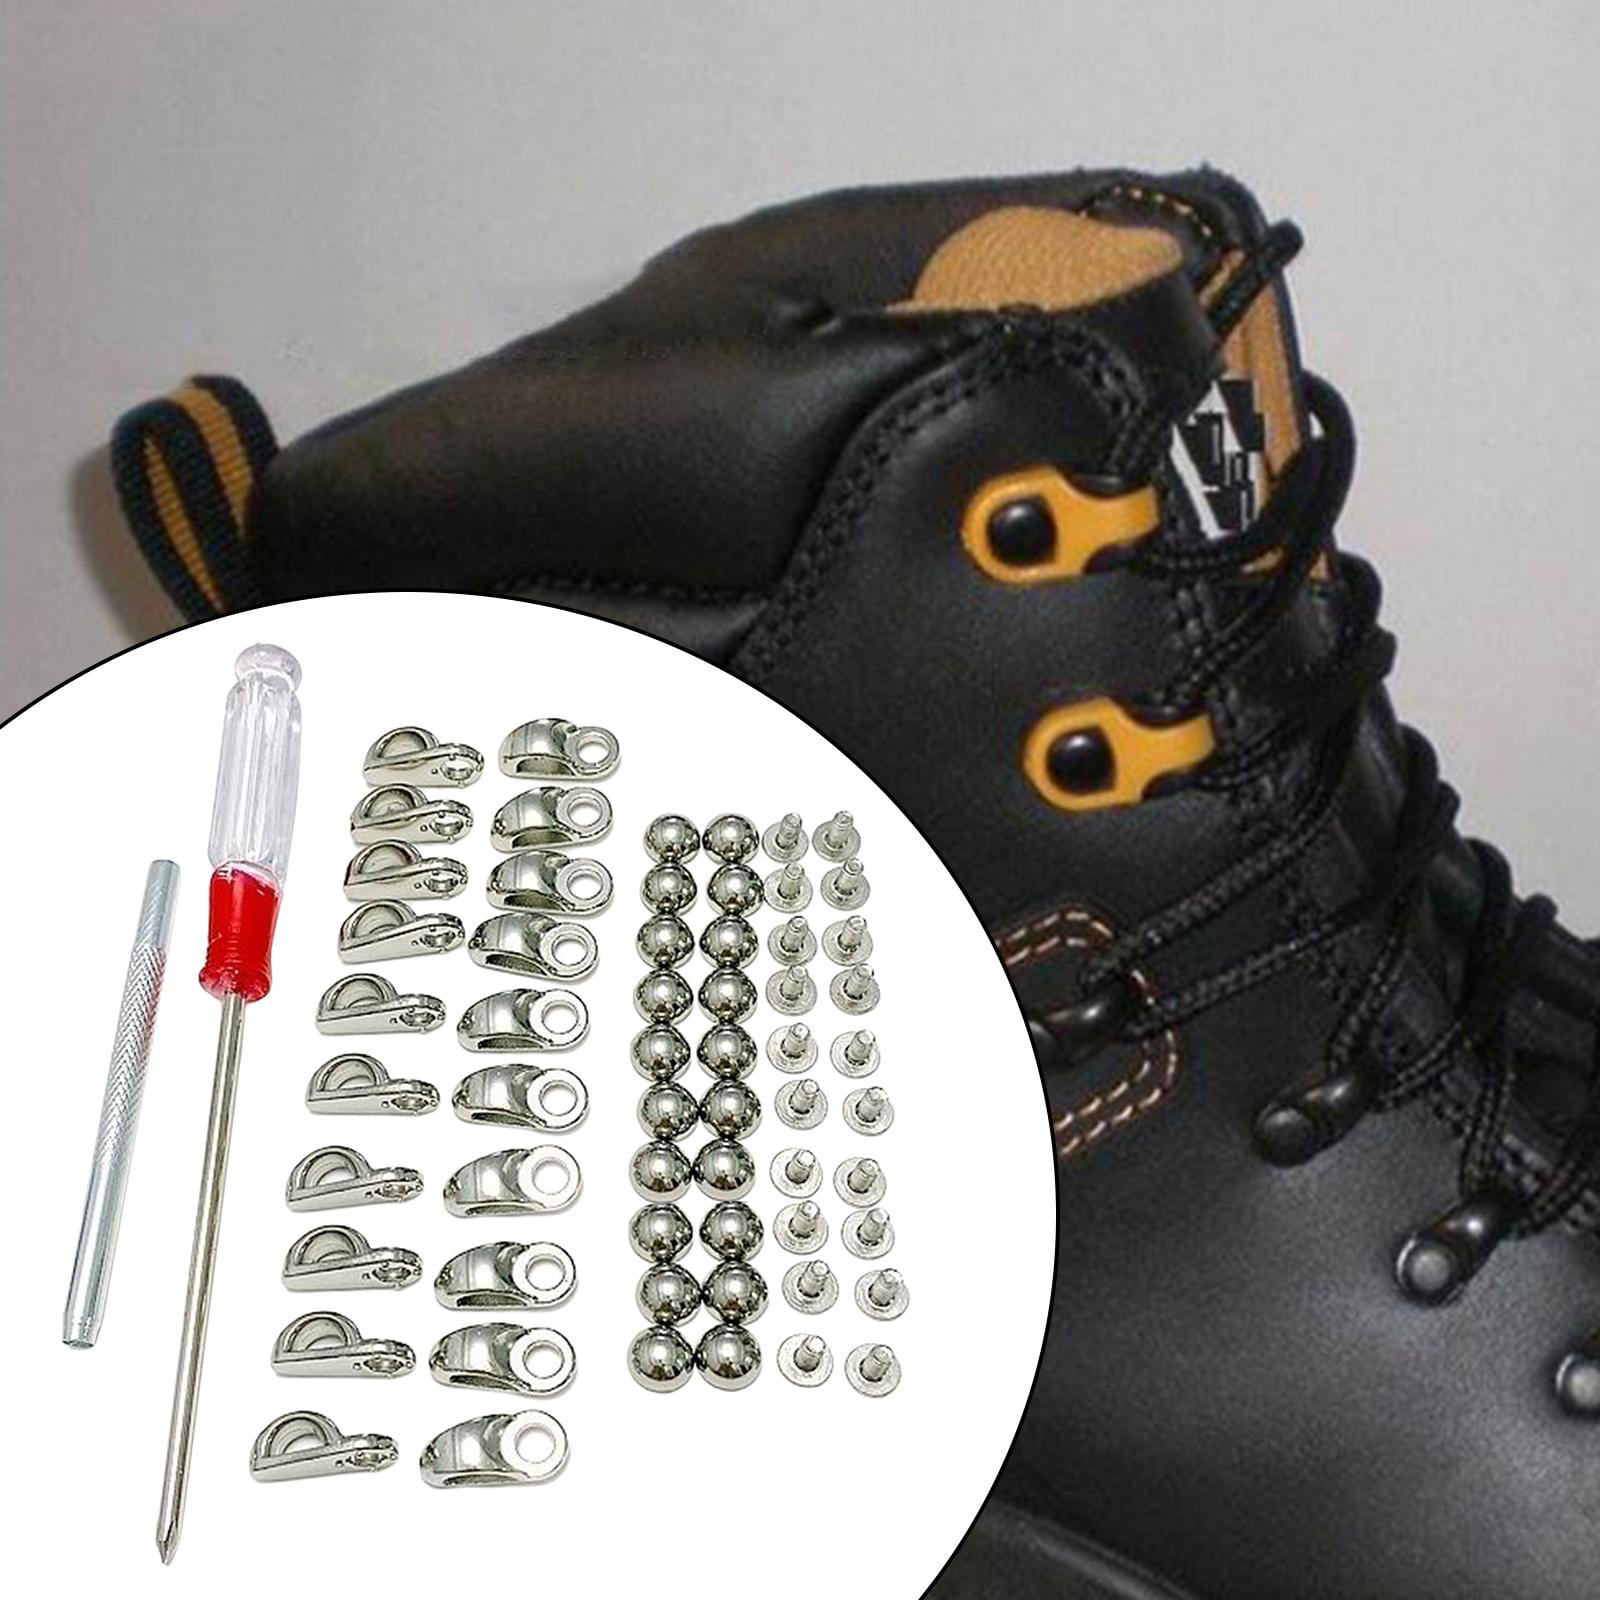 NOLITOY 4 Sets Shoe Boots Diy Buckle Shoe Repair Boot Eyelet Repair Kit  Restorer Tool Grommet Tool Kit Snap Rivet Setter Leather Laces for Boots  Boot